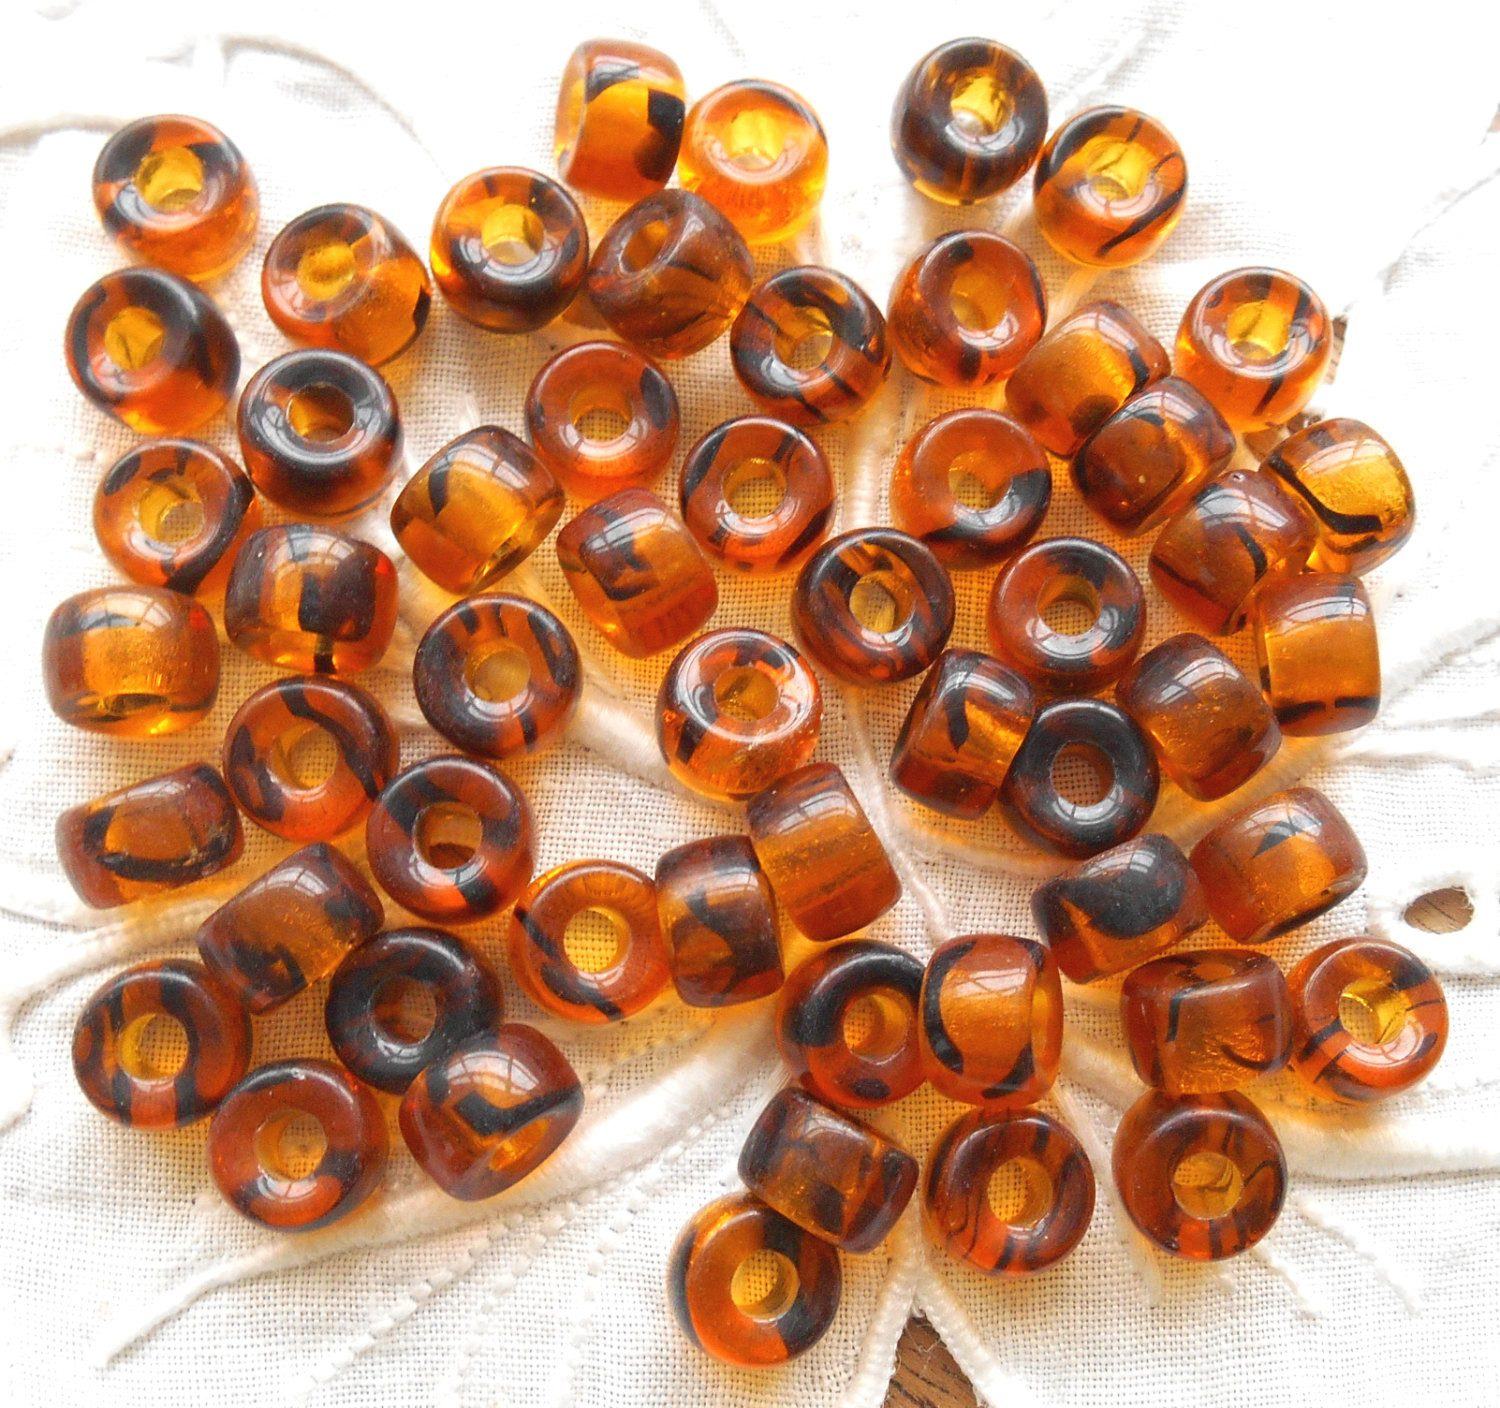 European Large Hole Czech Glass Beads: What They Are & Different Sizes